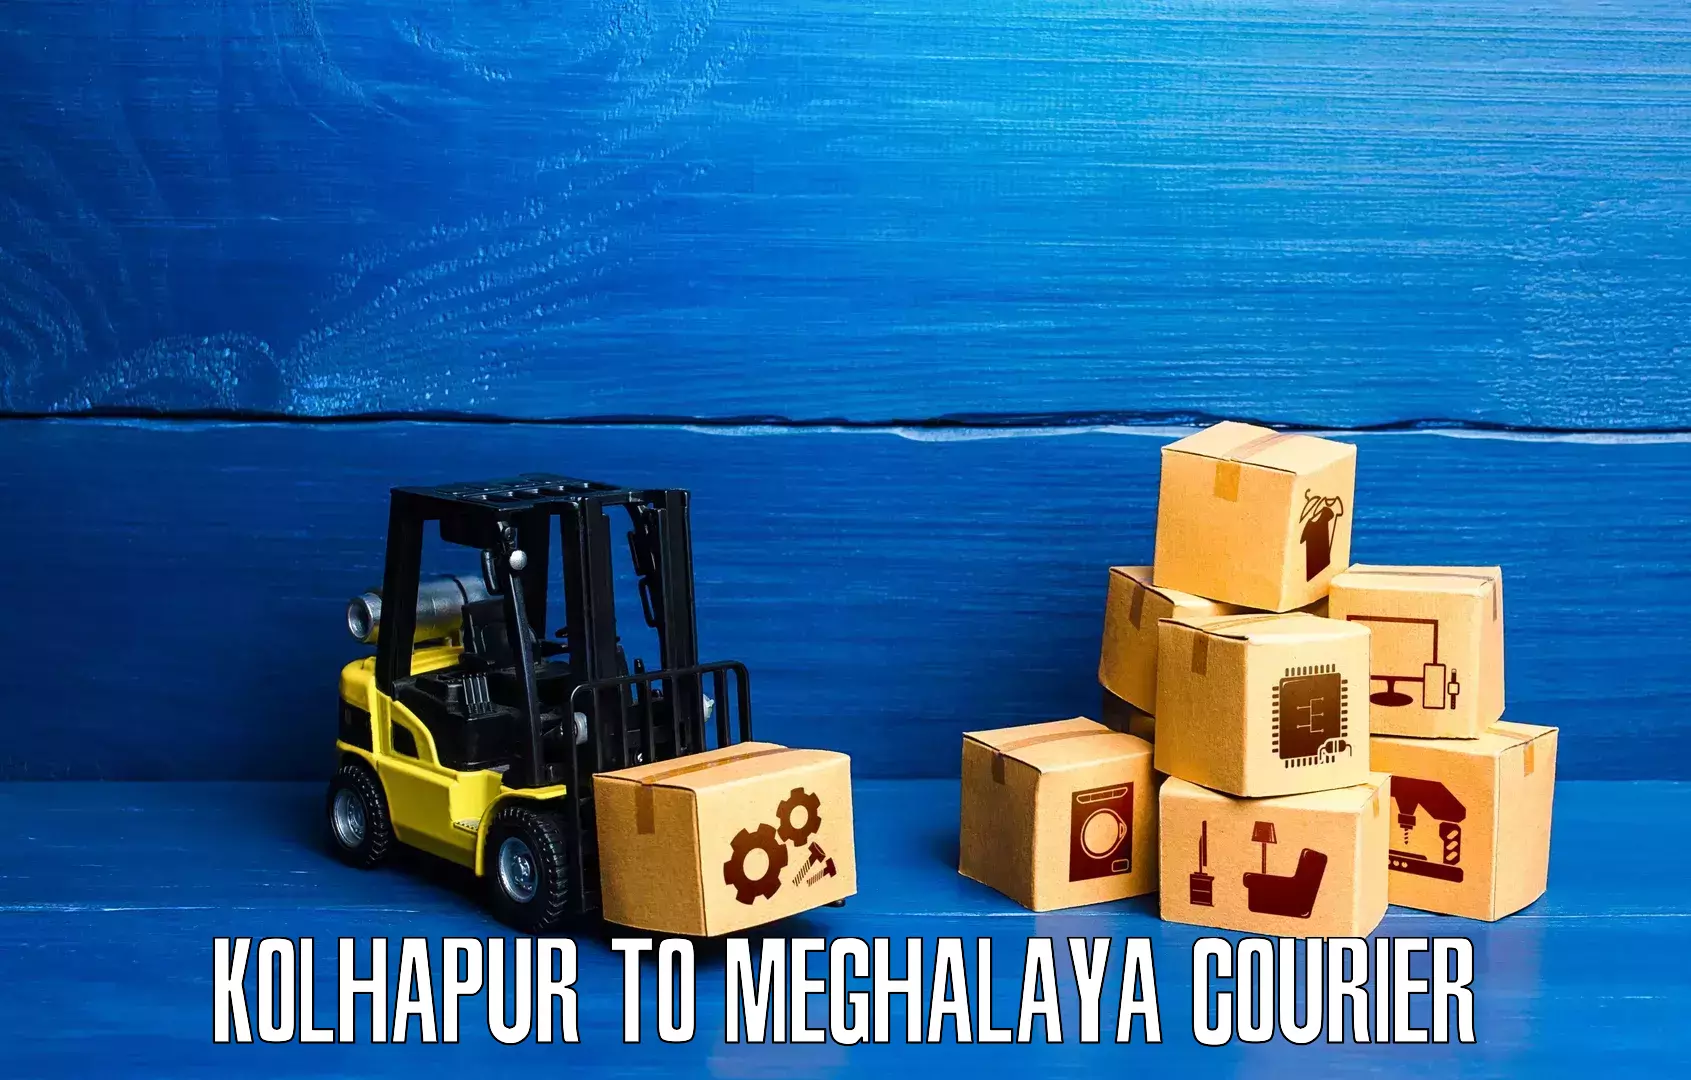 Global courier networks Kolhapur to Shillong